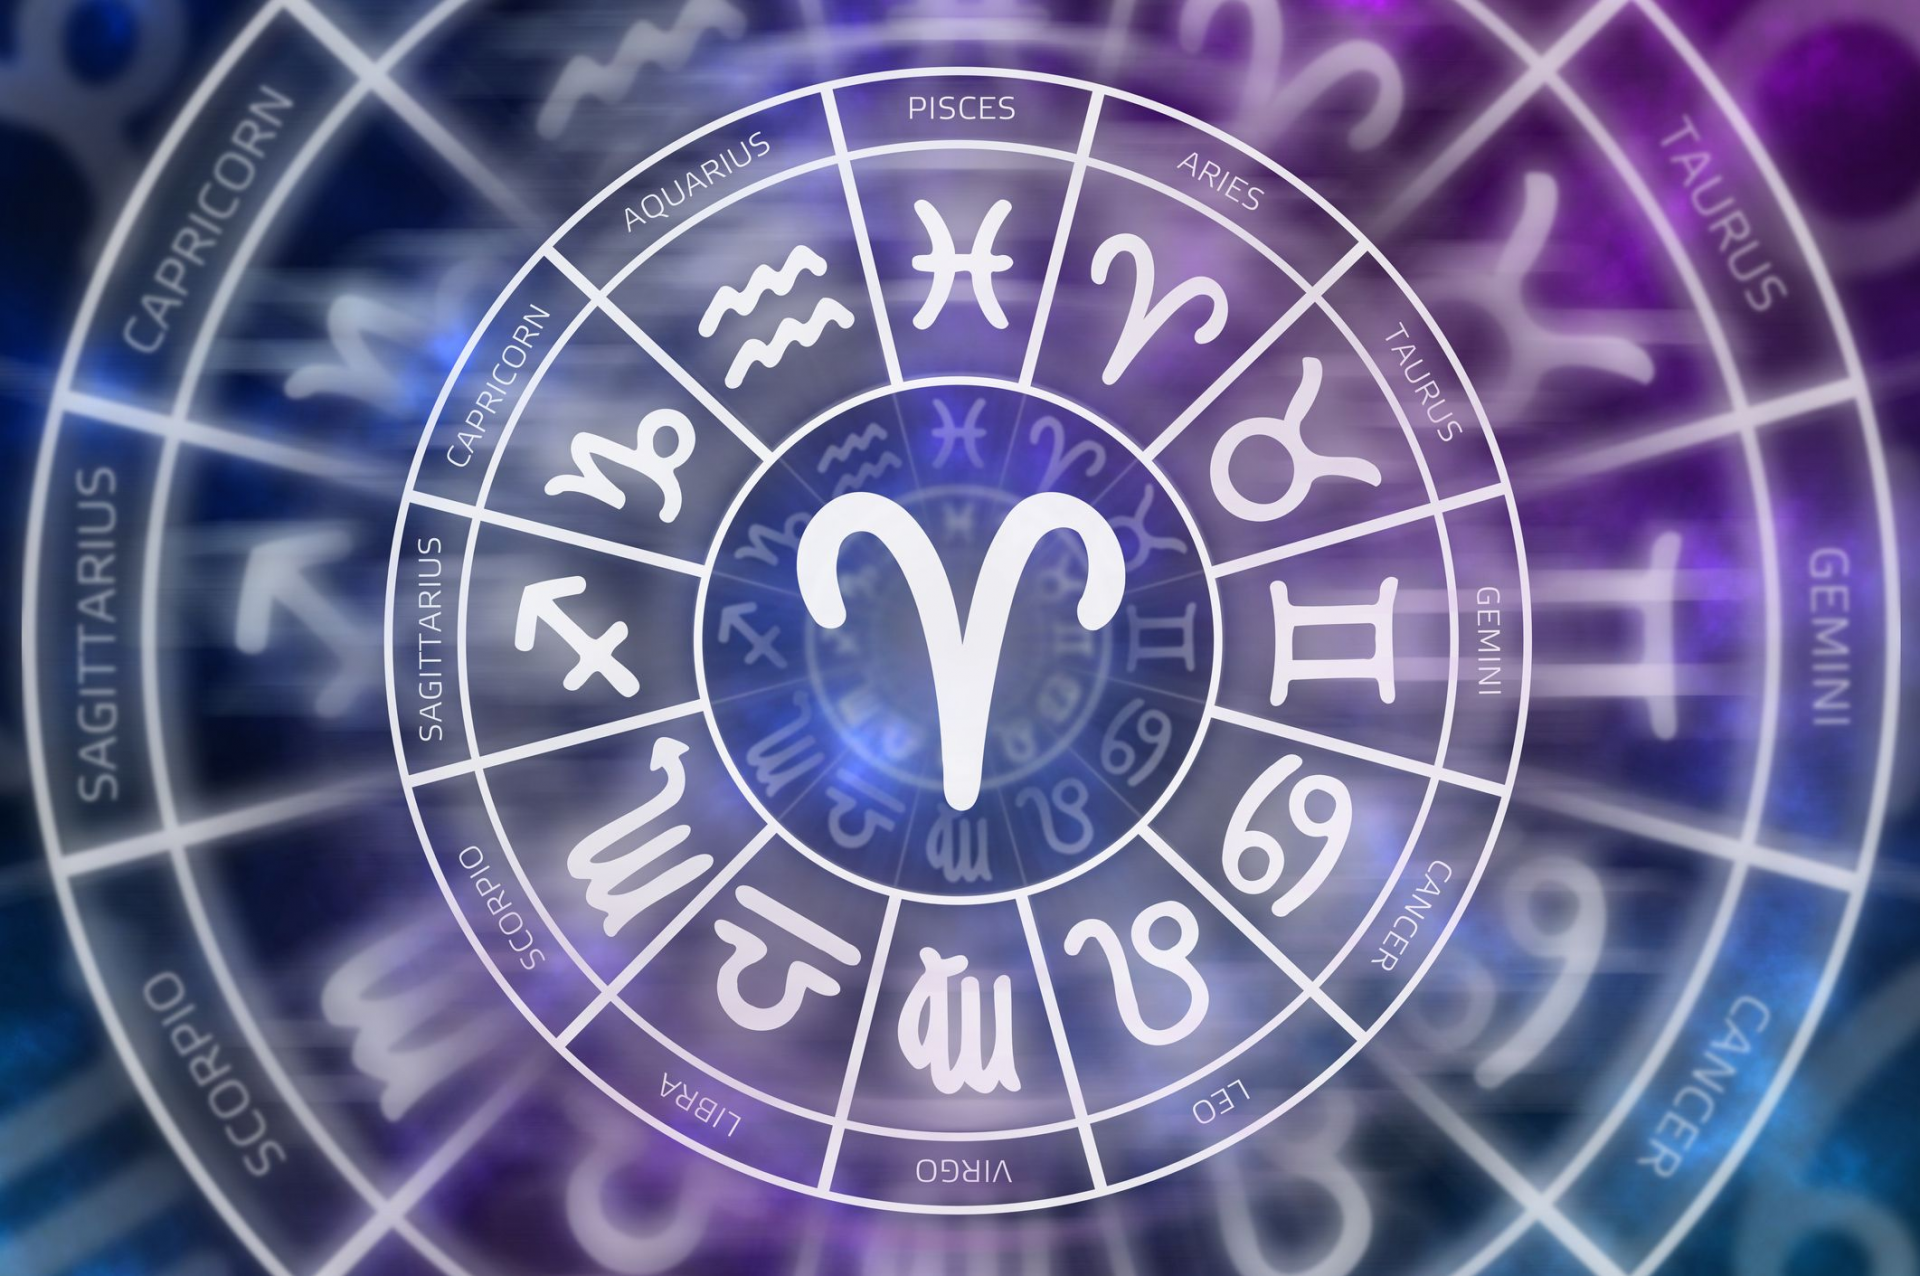 Daily Horoscope: Accurate every day horoscopes for 12 signs, Love Compatibility, Sex Compatibility, Friend Compatibility, Chinese Zodiac Compatibility, Sibling Compatibility